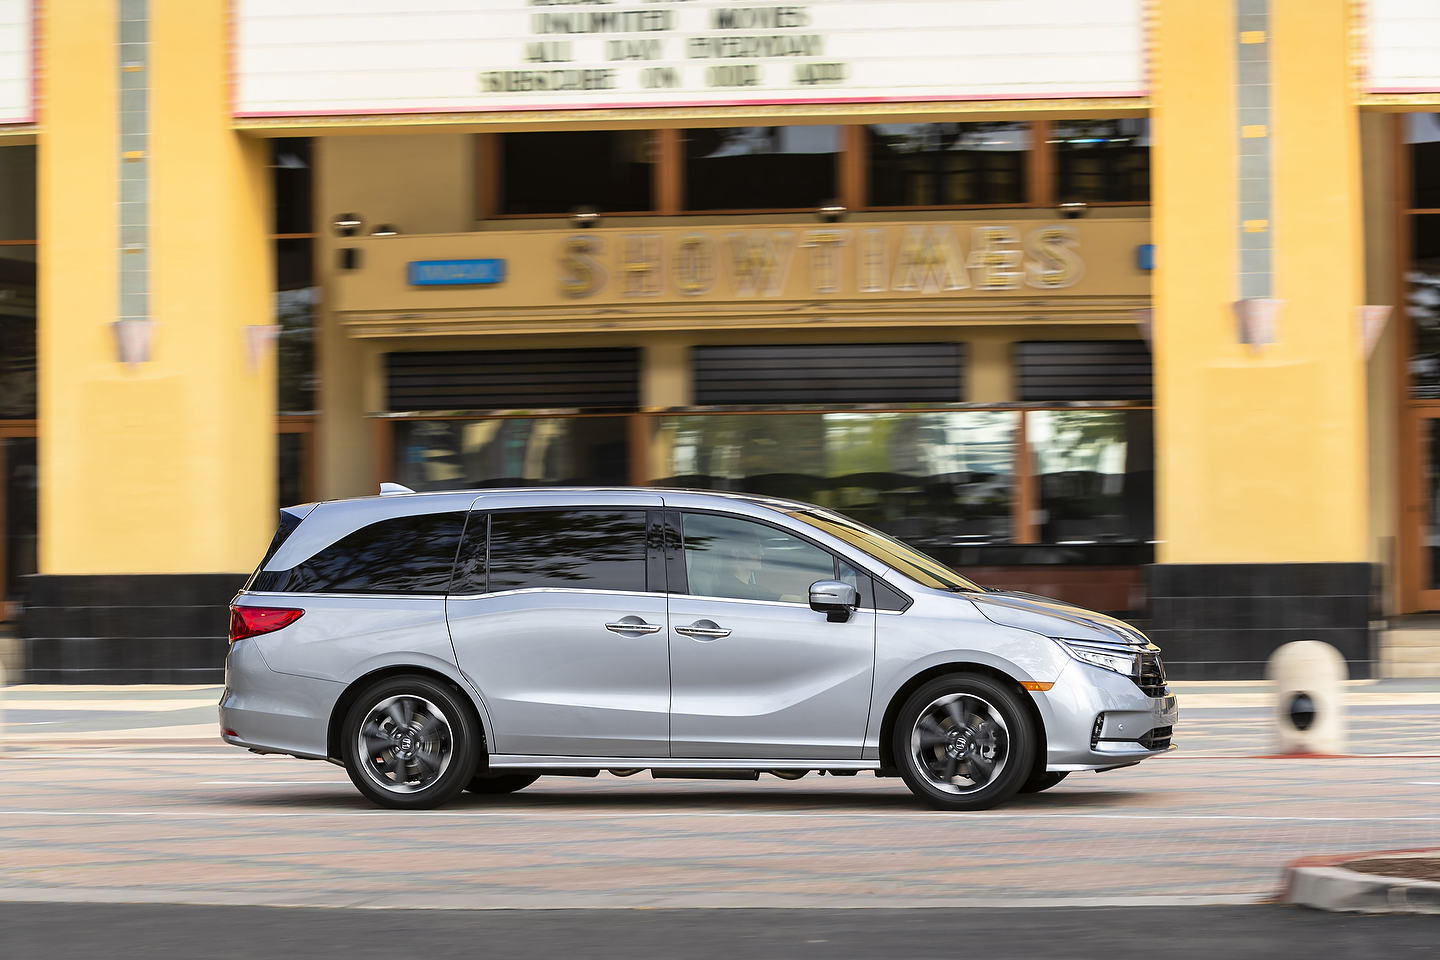 Three reasons to buy a certified pre-owned Honda vehicle